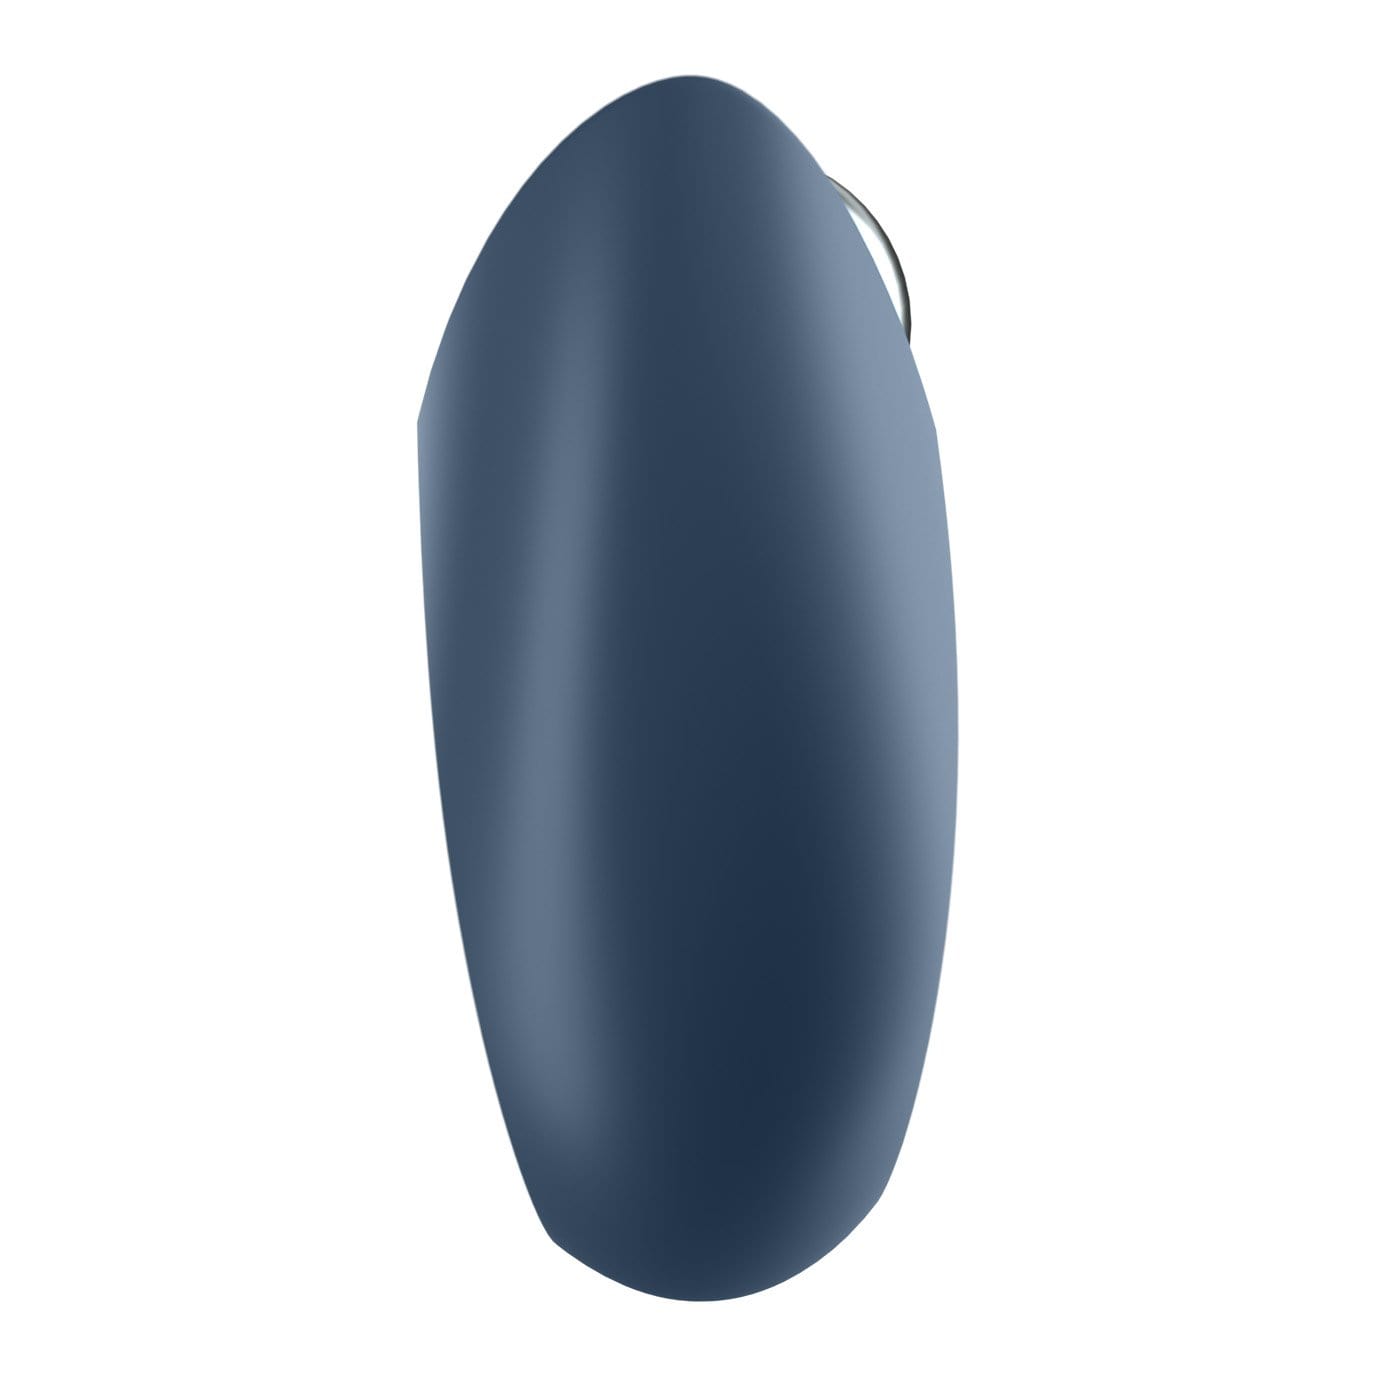 Satisfyer - Royal One Ring App-Controlled Bluetooth Cock Ring (Blue) Remote Control Cock Ring (Vibration) Rechargeable 289885076 CherryAffairs